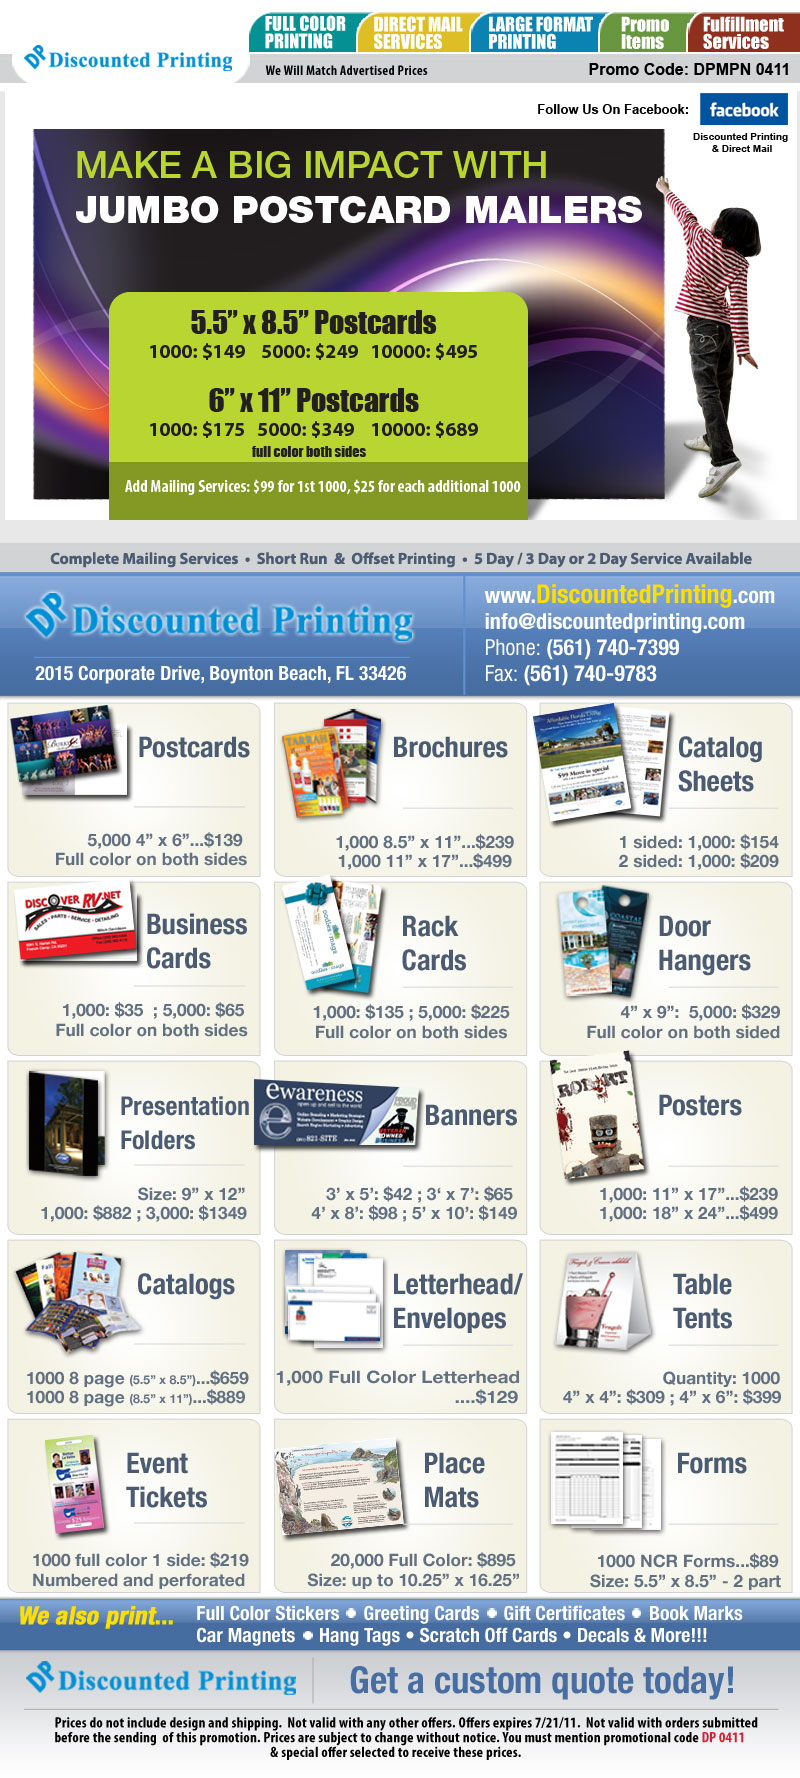 Make An Impact With Jumbo Postcards From DiscountedPrinting.com